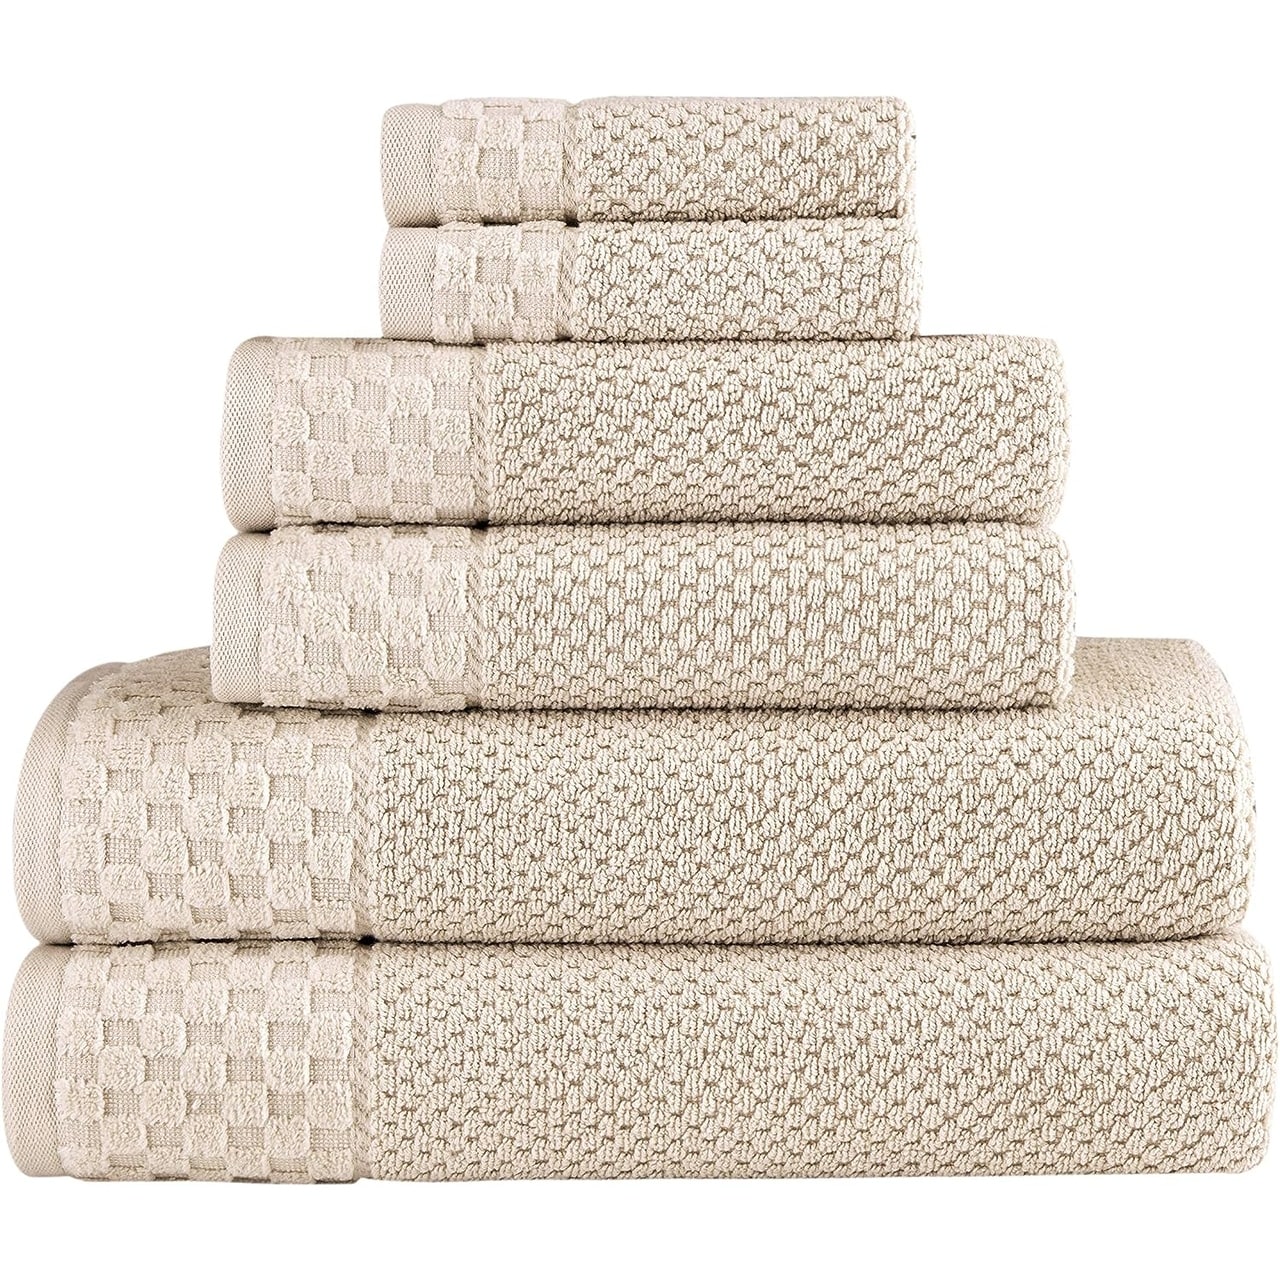 https://ak1.ostkcdn.com/images/products/is/images/direct/dcdfd093abcb9e35af06c2422f1cc0228f59d2e4/Boston-Towel-Collection-Turkish-Cotton-Luxury-and-Soft-2-Large-Bath-Towels%2C-2-Washcloths-and-2-Hand-Towels-%28Set-of-6%29.jpg